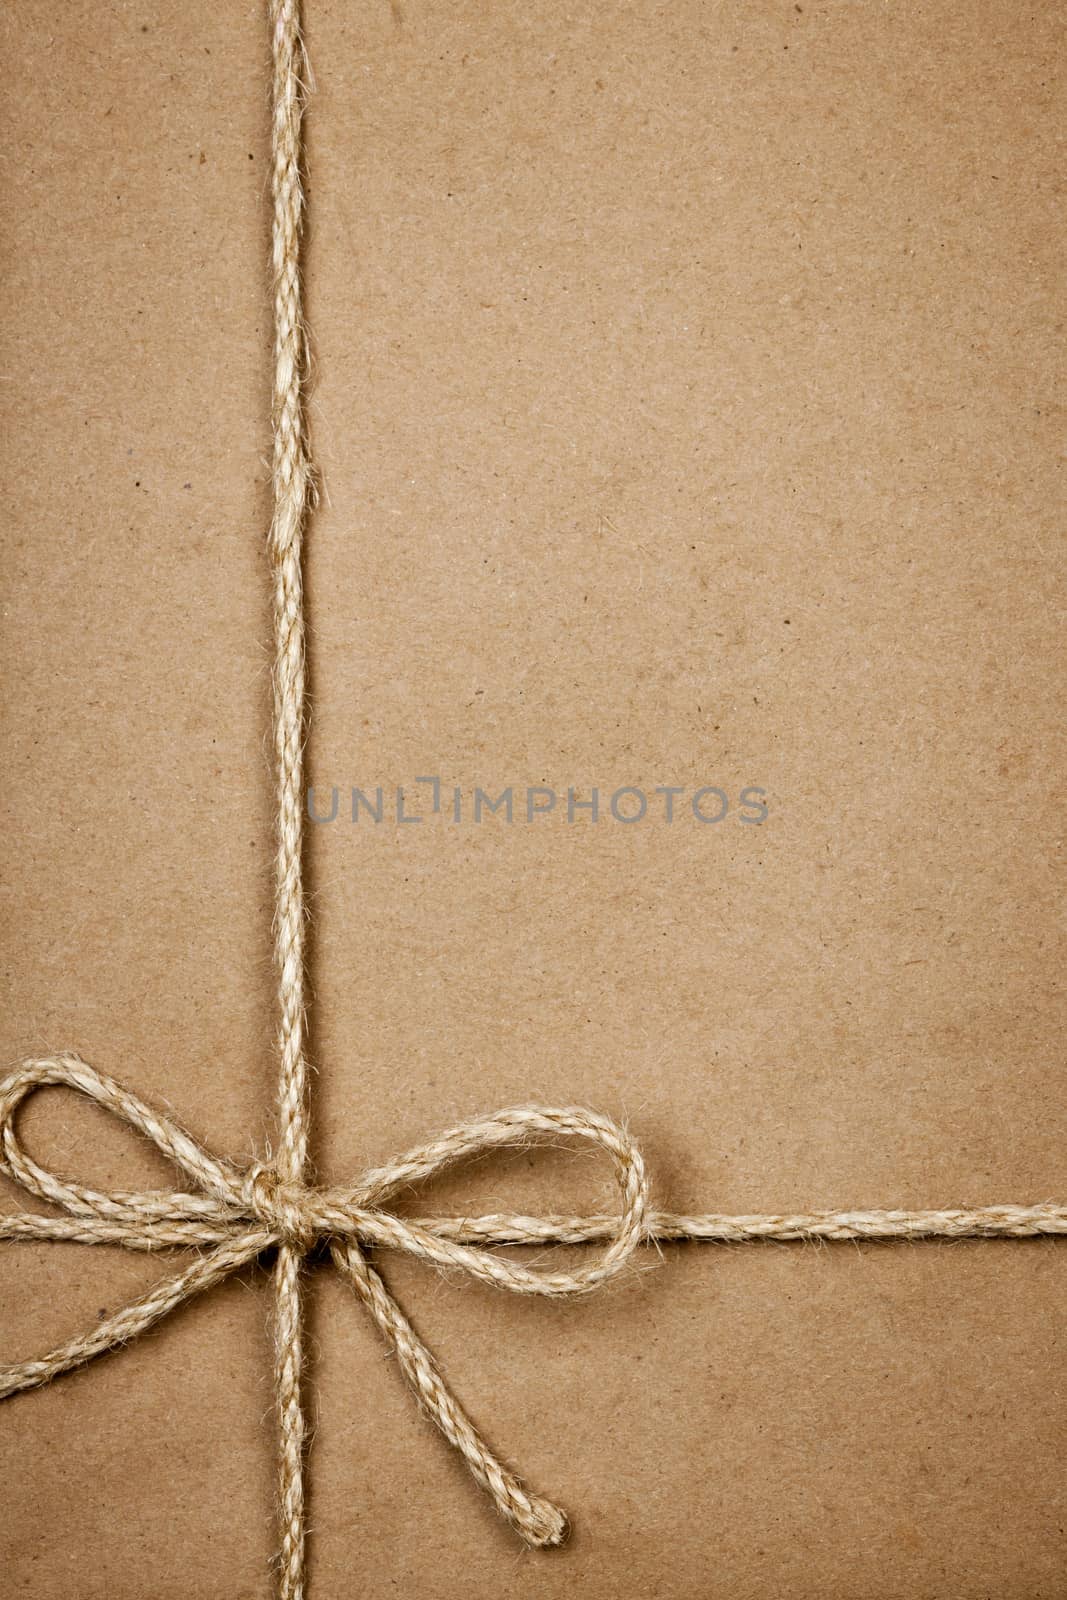 Package in brown paper tied with string by elenathewise